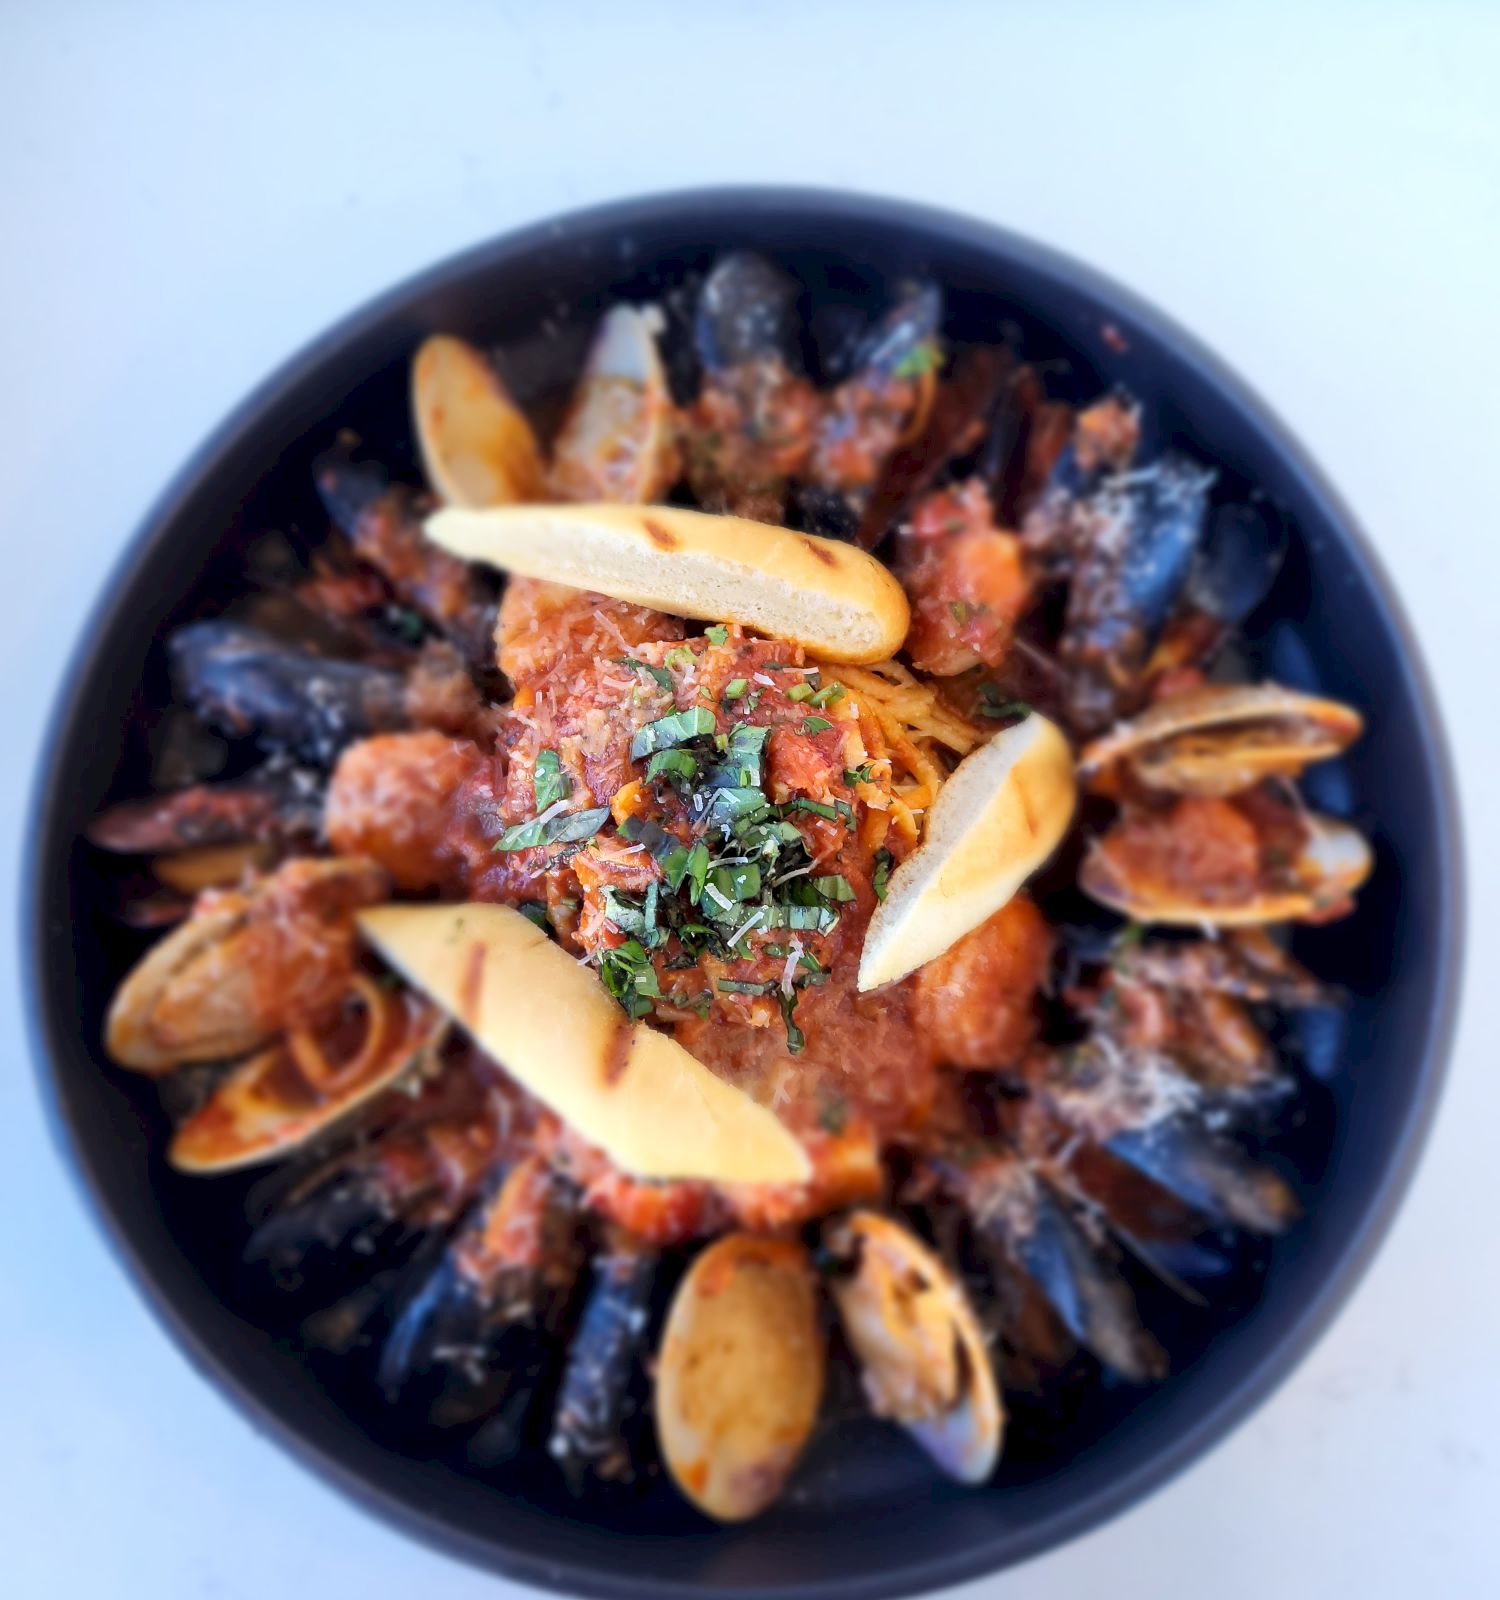 A black bowl filled with mussels, clams, and other seafood, garnished with herbs and sliced bread on top, all served in a savory sauce.